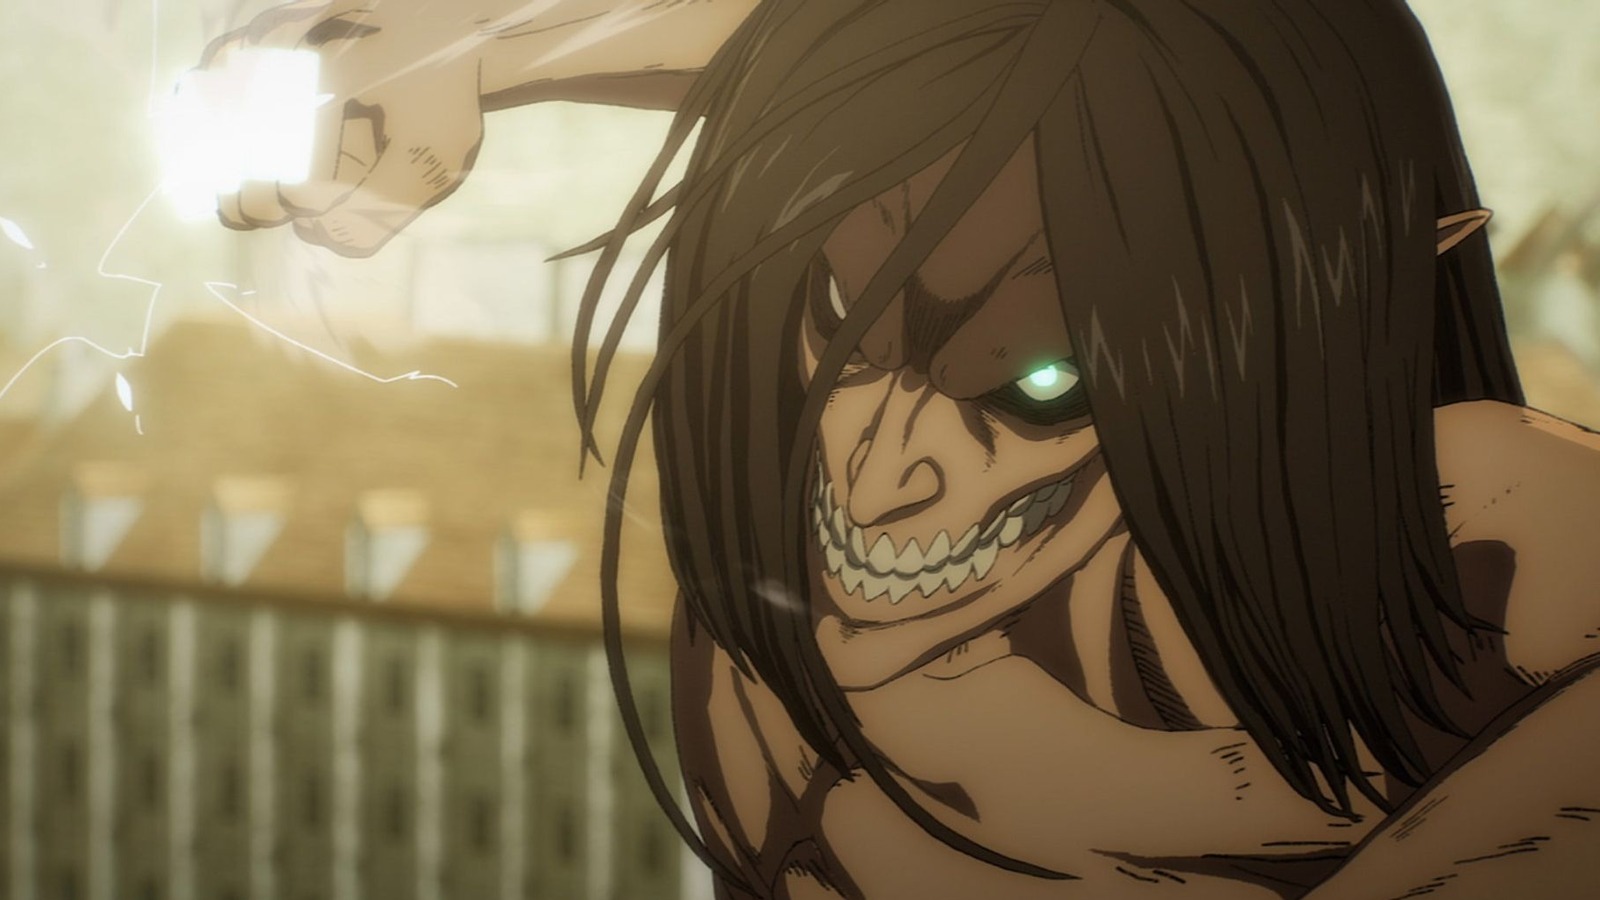 The Anime That Inspired Attack On Titan's Shift To CGI